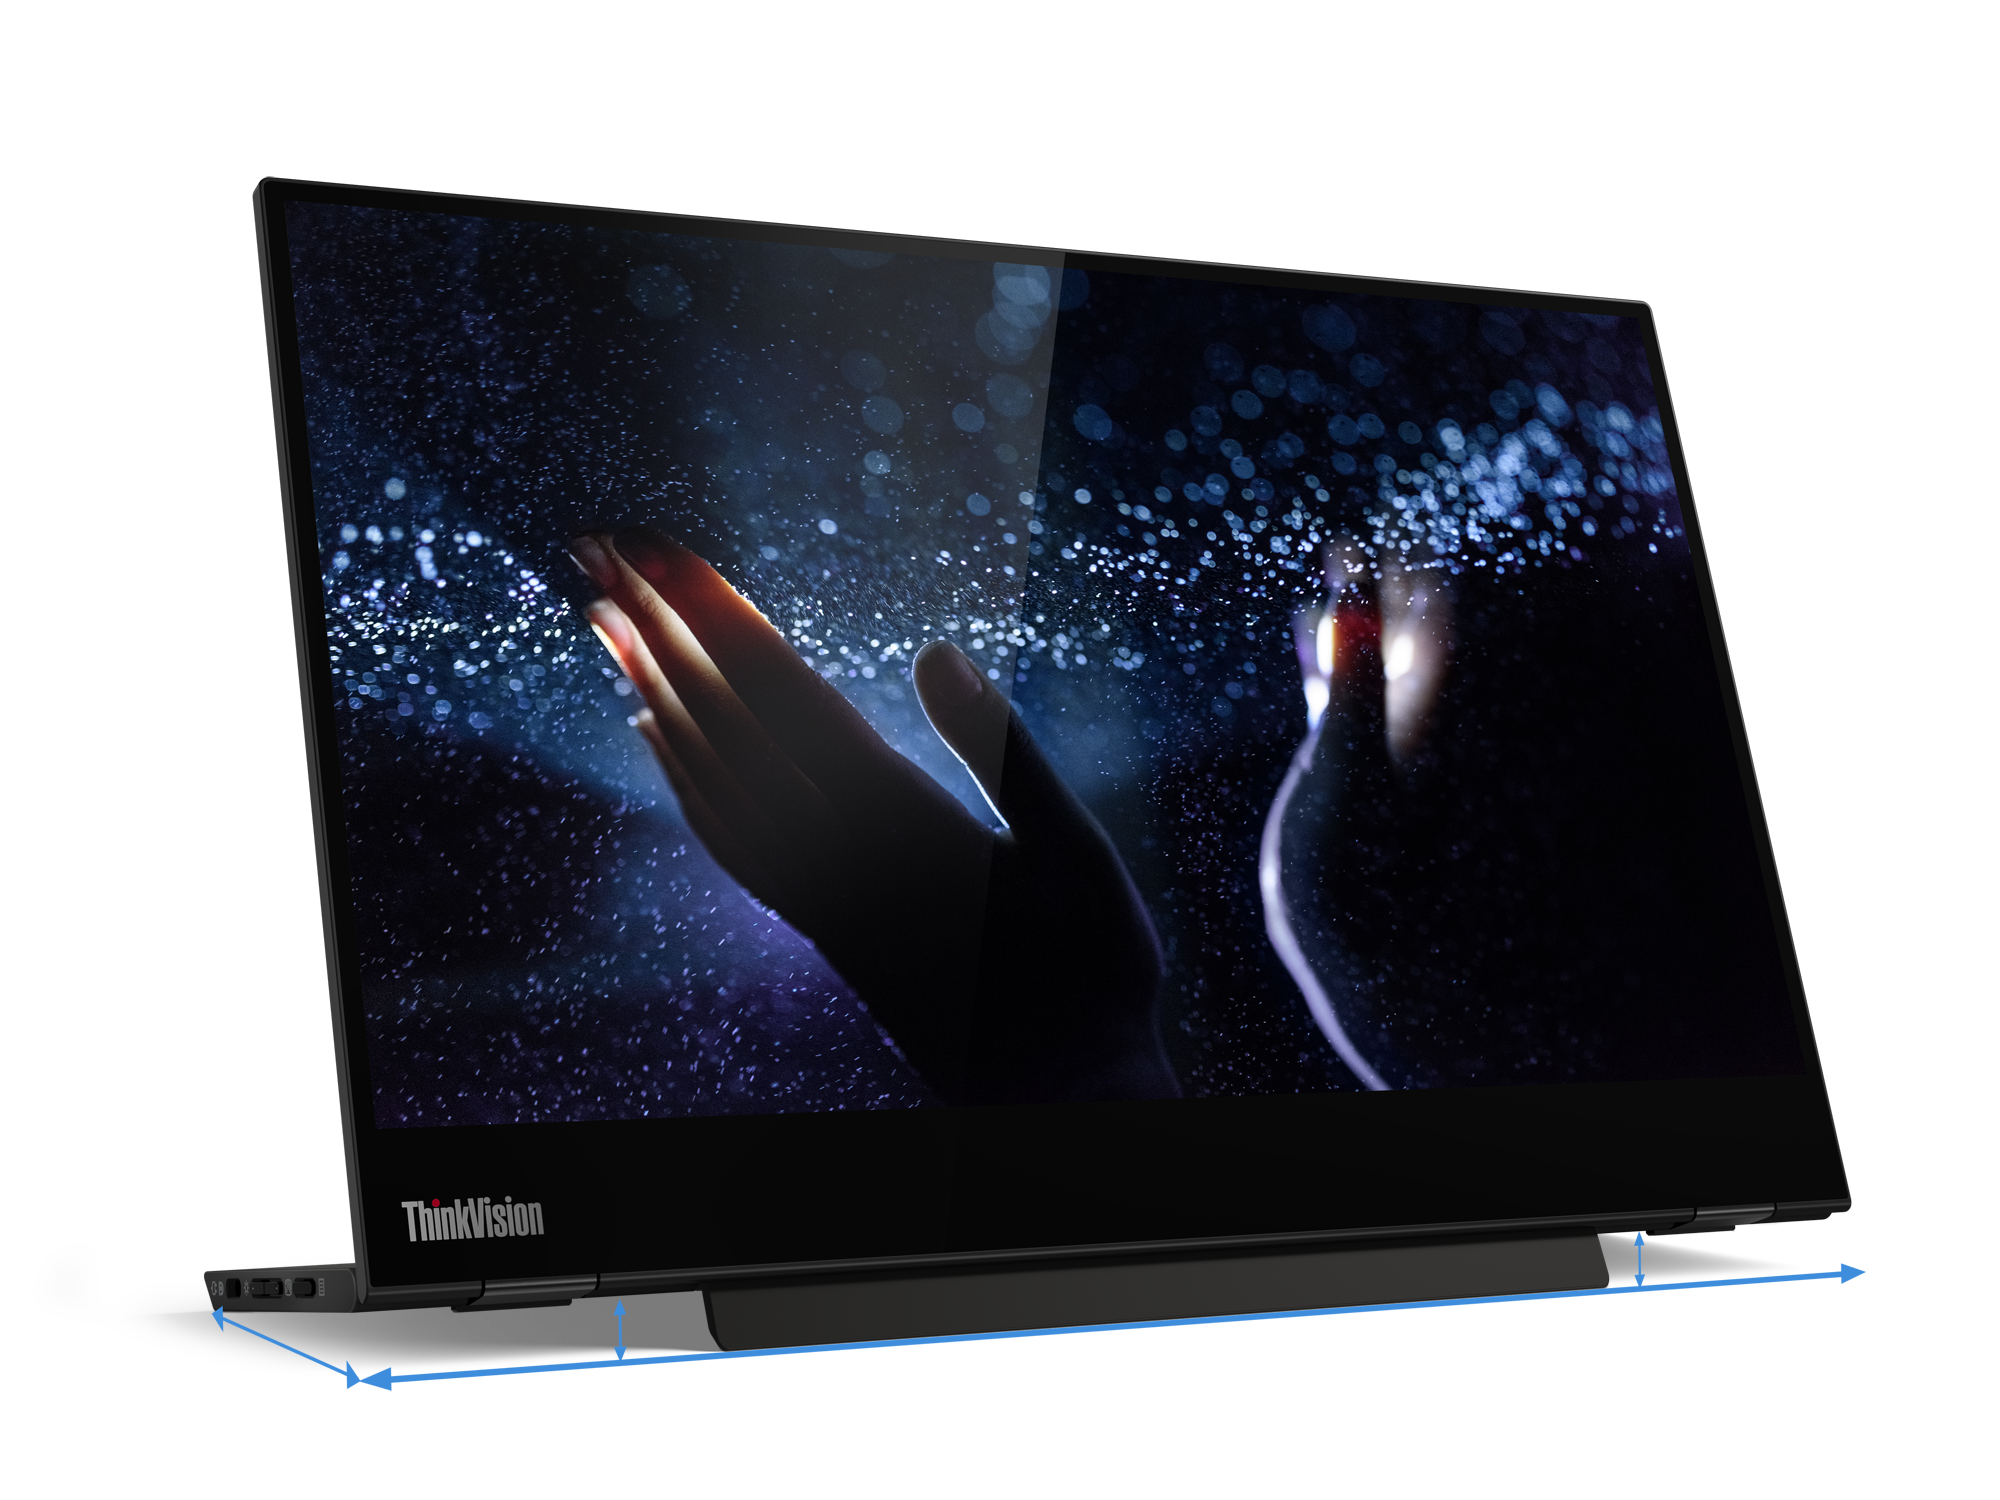 11 Thinkvision M14t Hero Front Facing Left Lenovo Unveil New Monitor ThinkVision M14t For Remote Workers